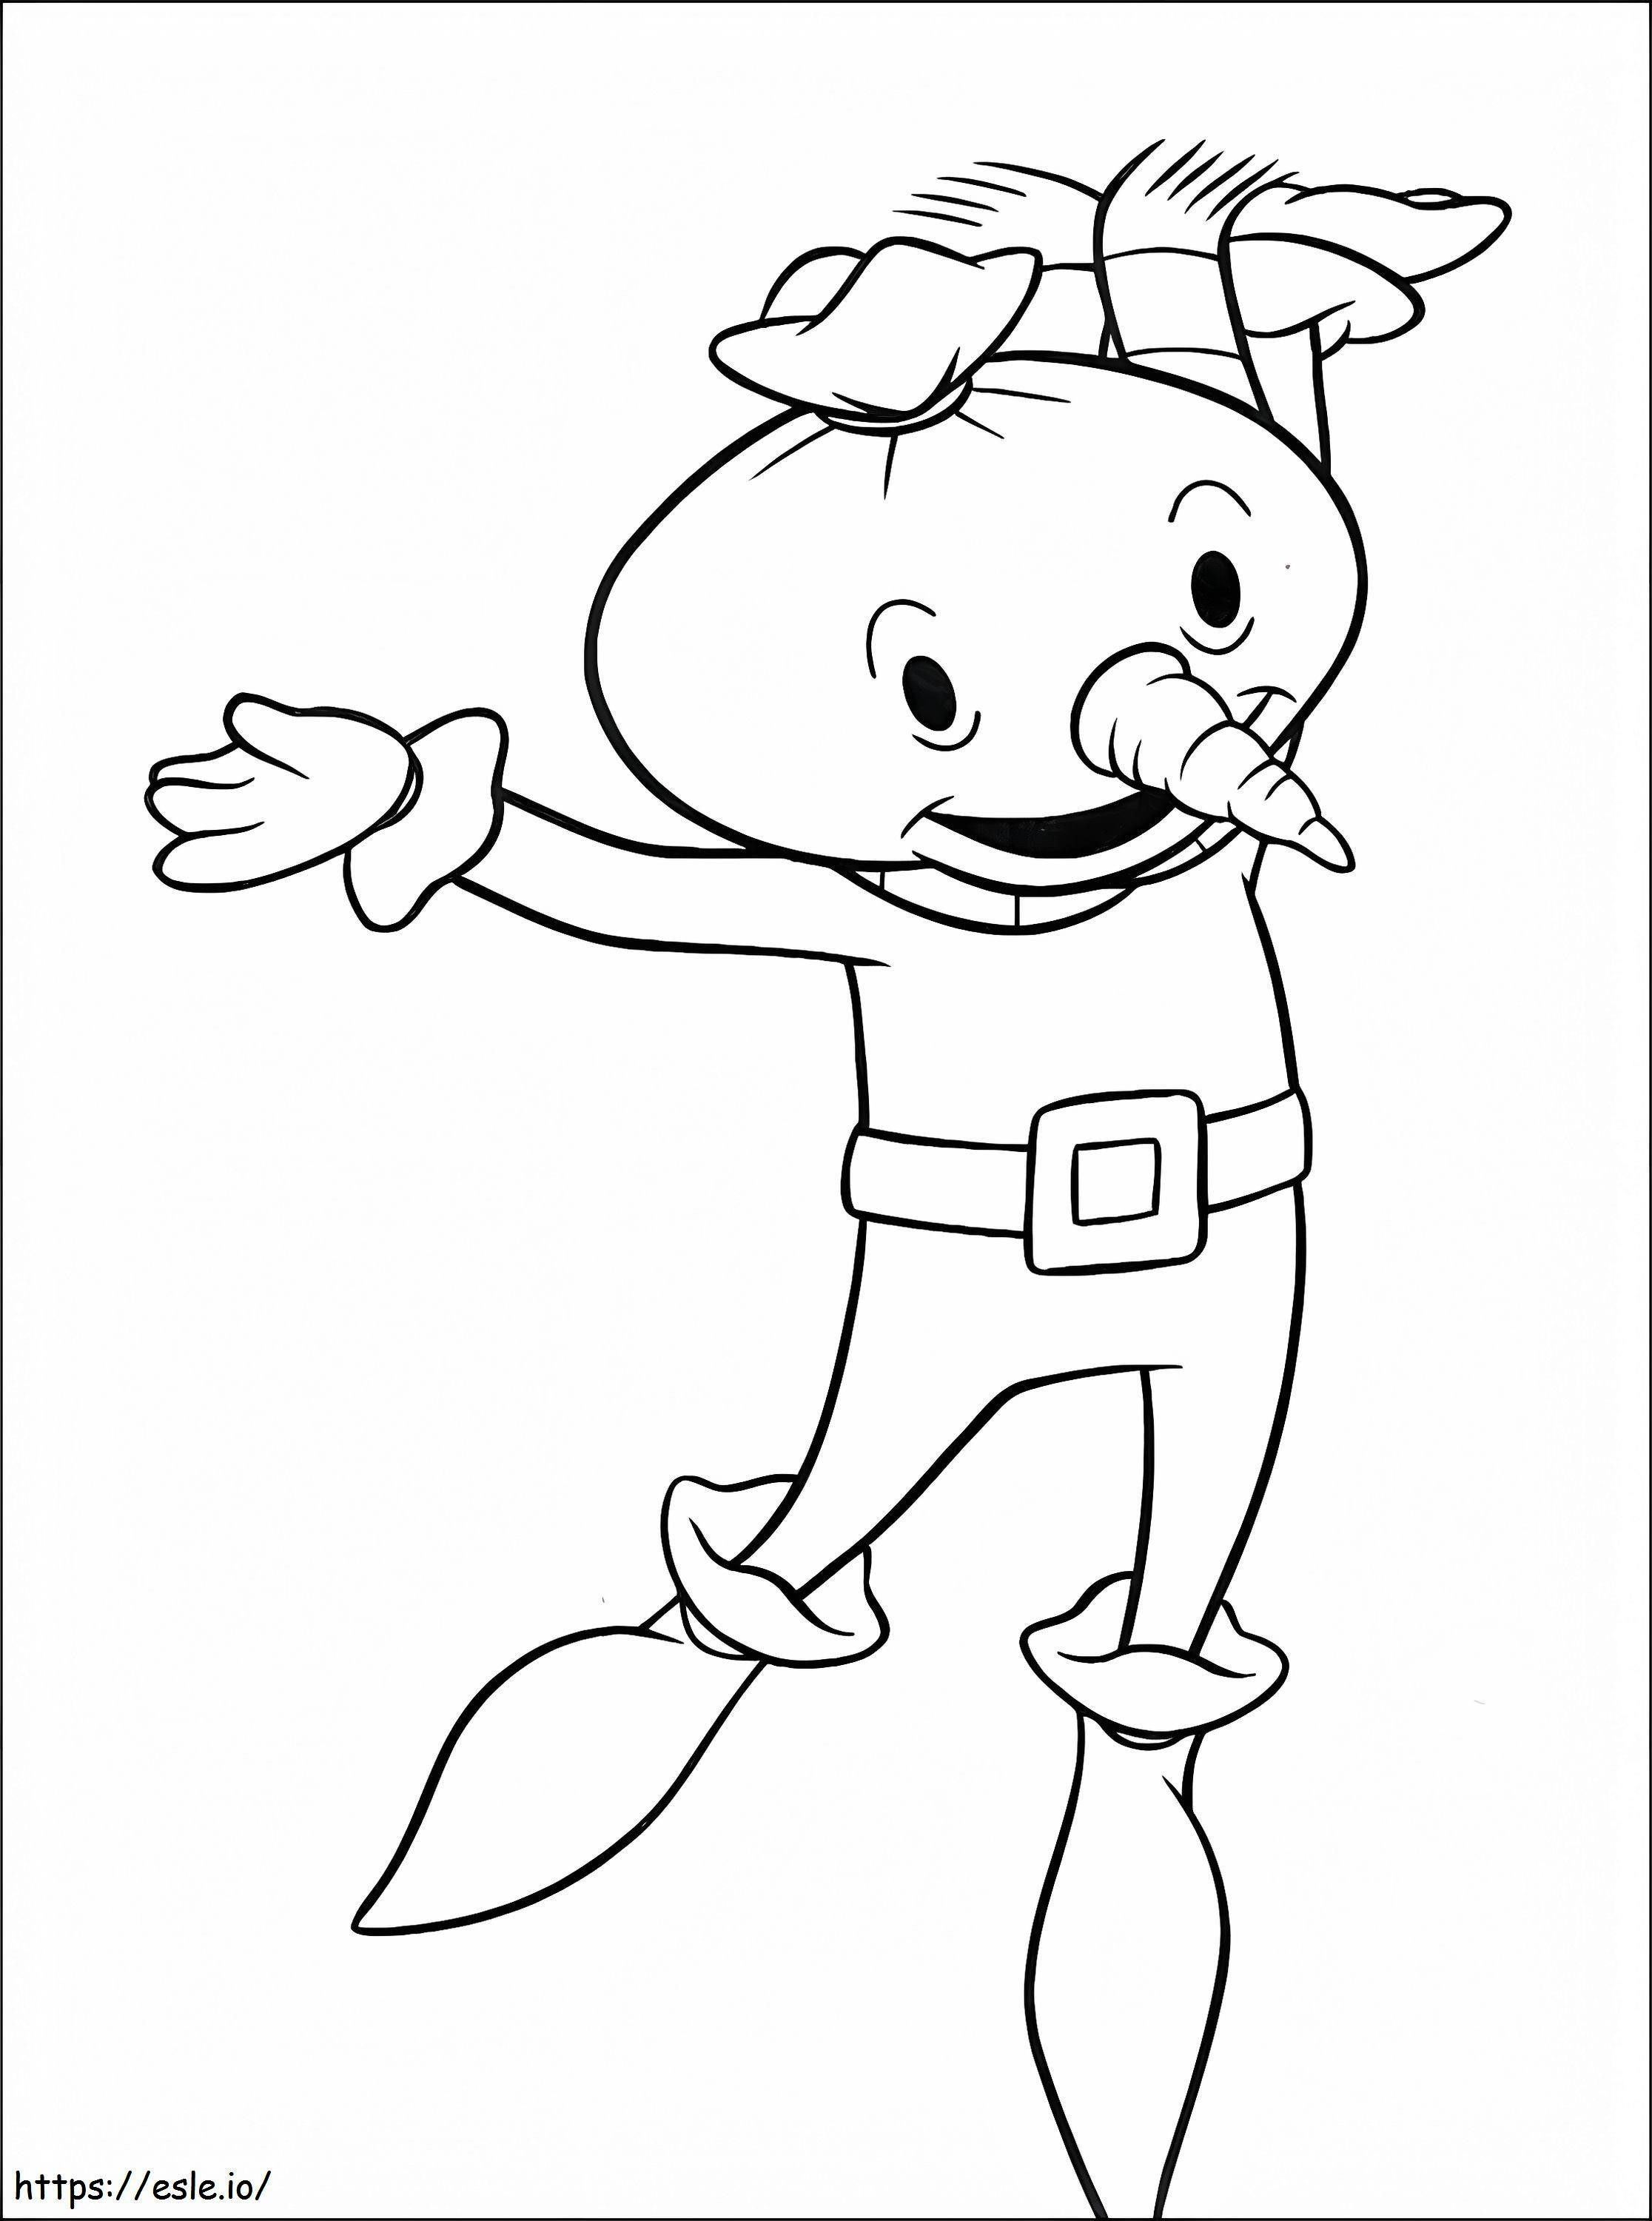 1534130730 Spud A4 coloring page